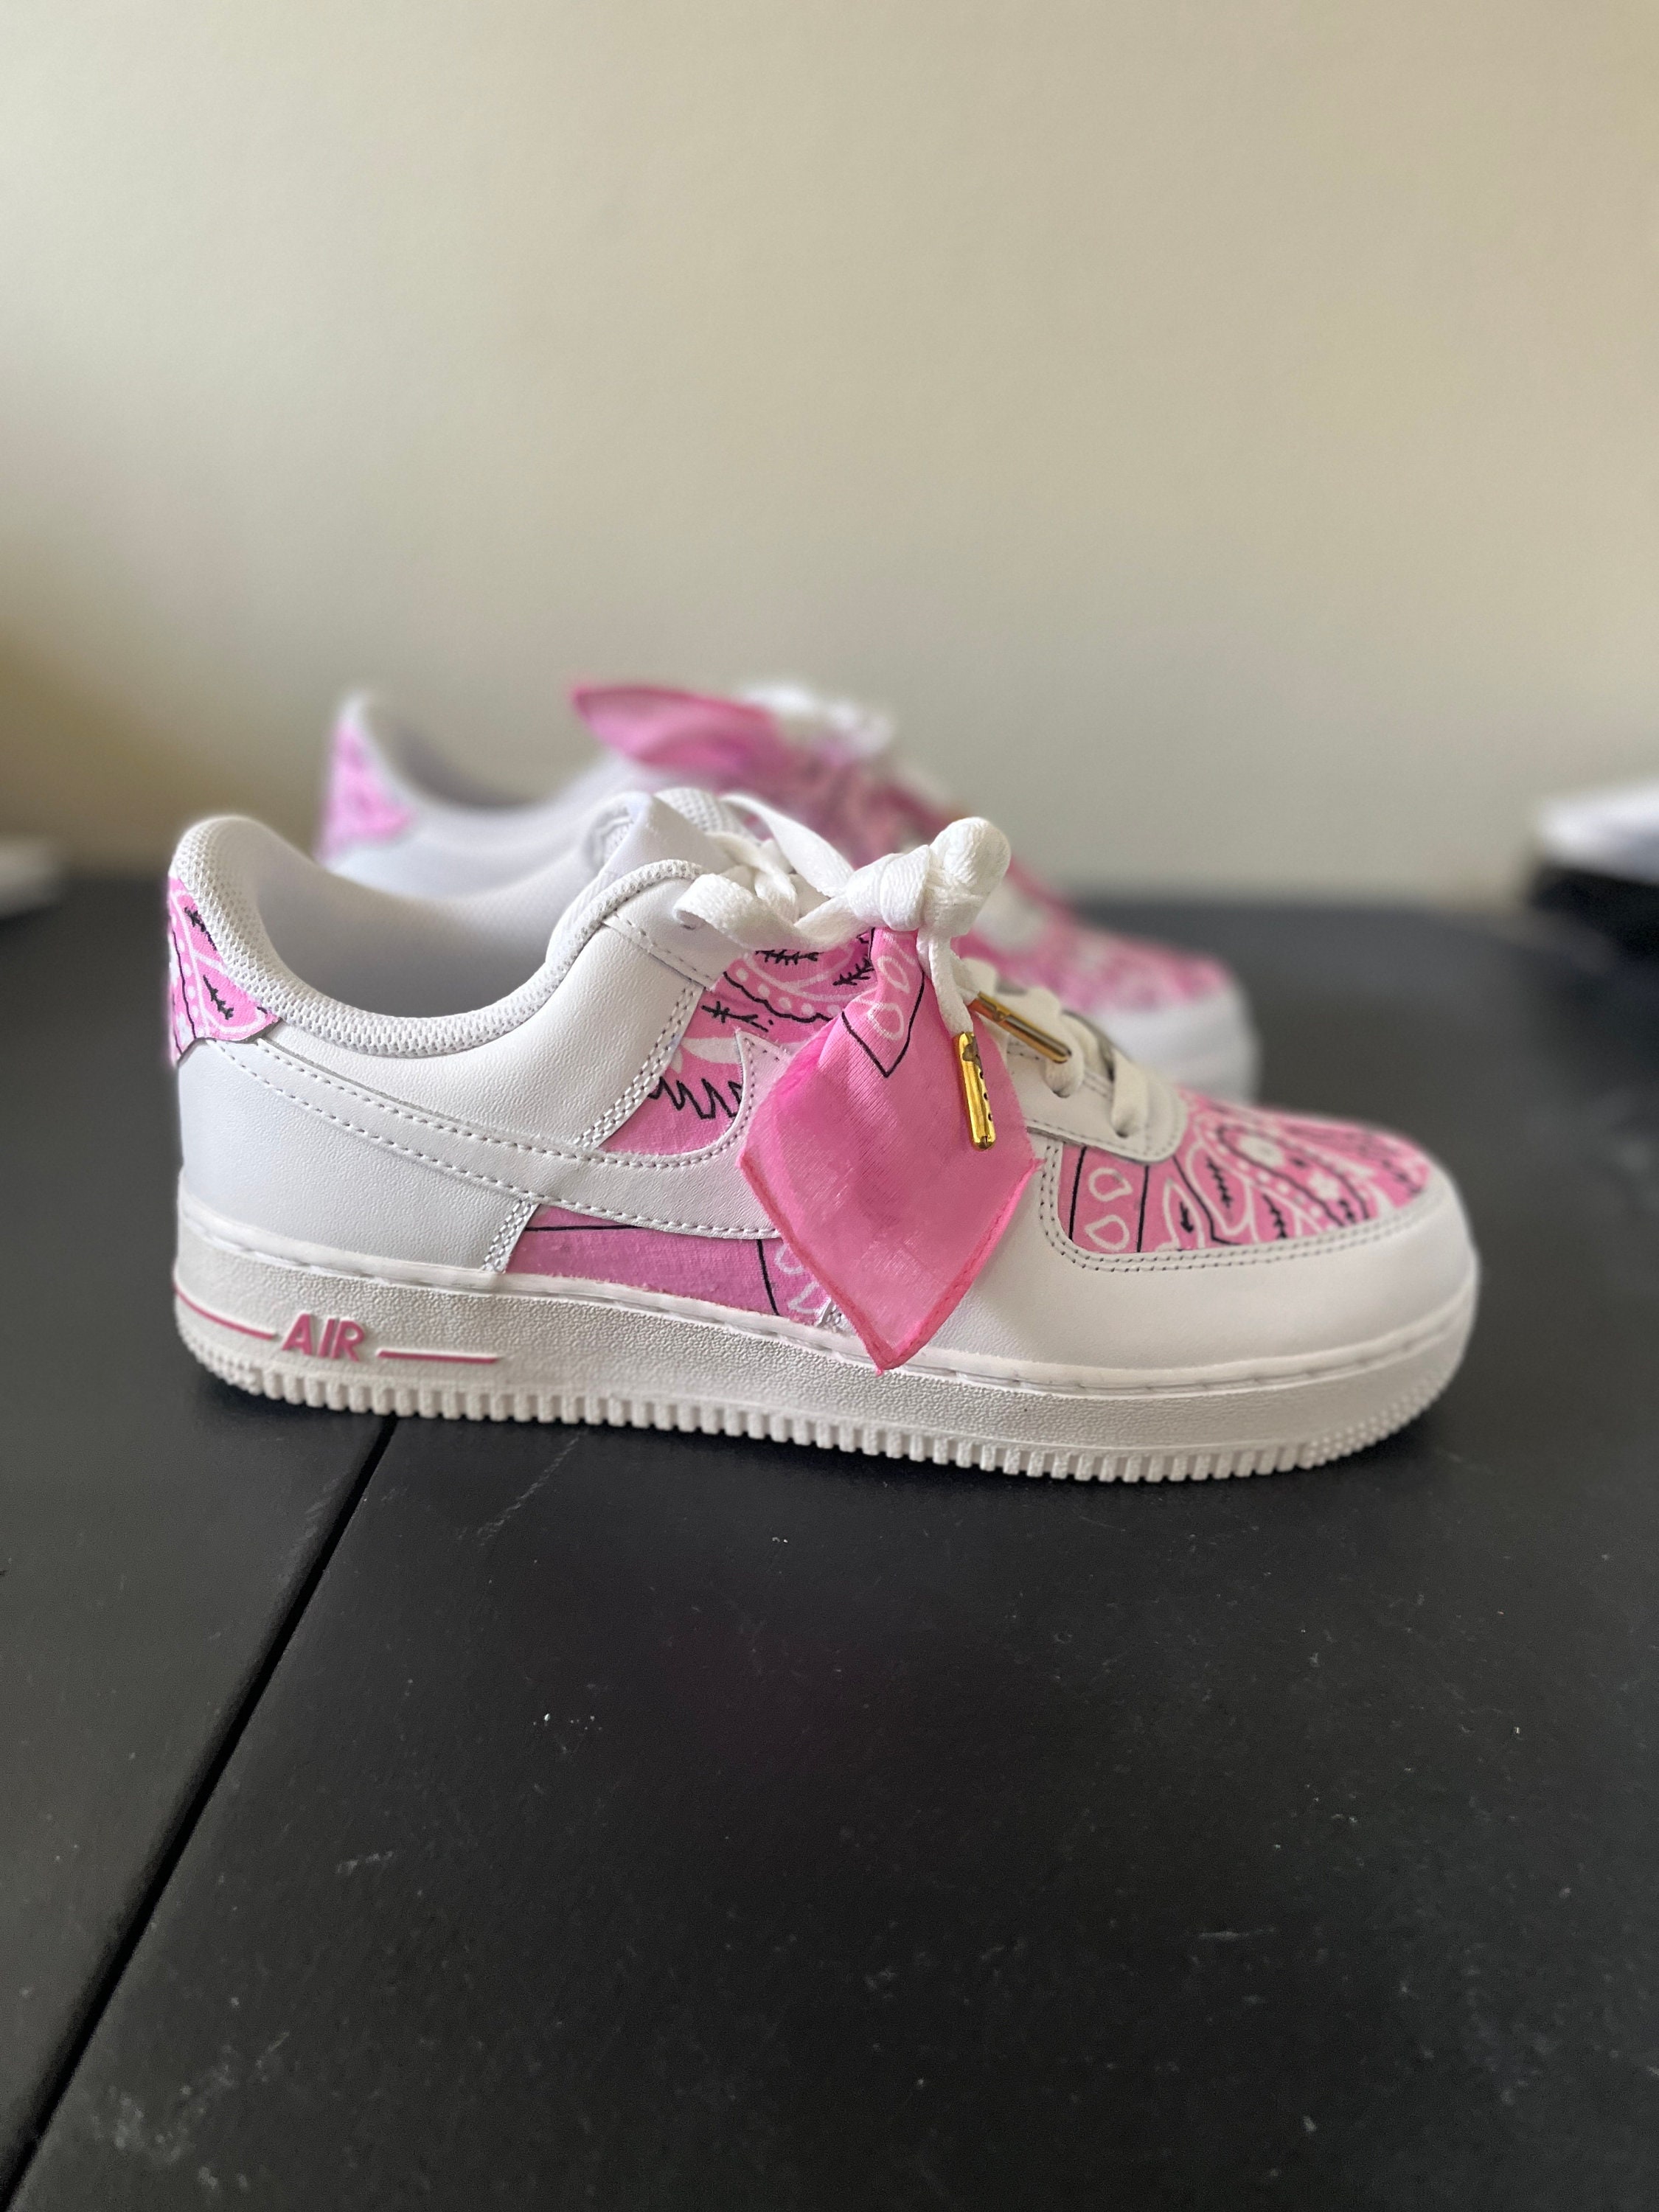 Air Force 1 Custom Low Pink Blue Neon Splatter Swoosh White Shoes Gend –  Rose Customs, Air Force 1 Custom Shoes Sneakers Design Your Own AF1